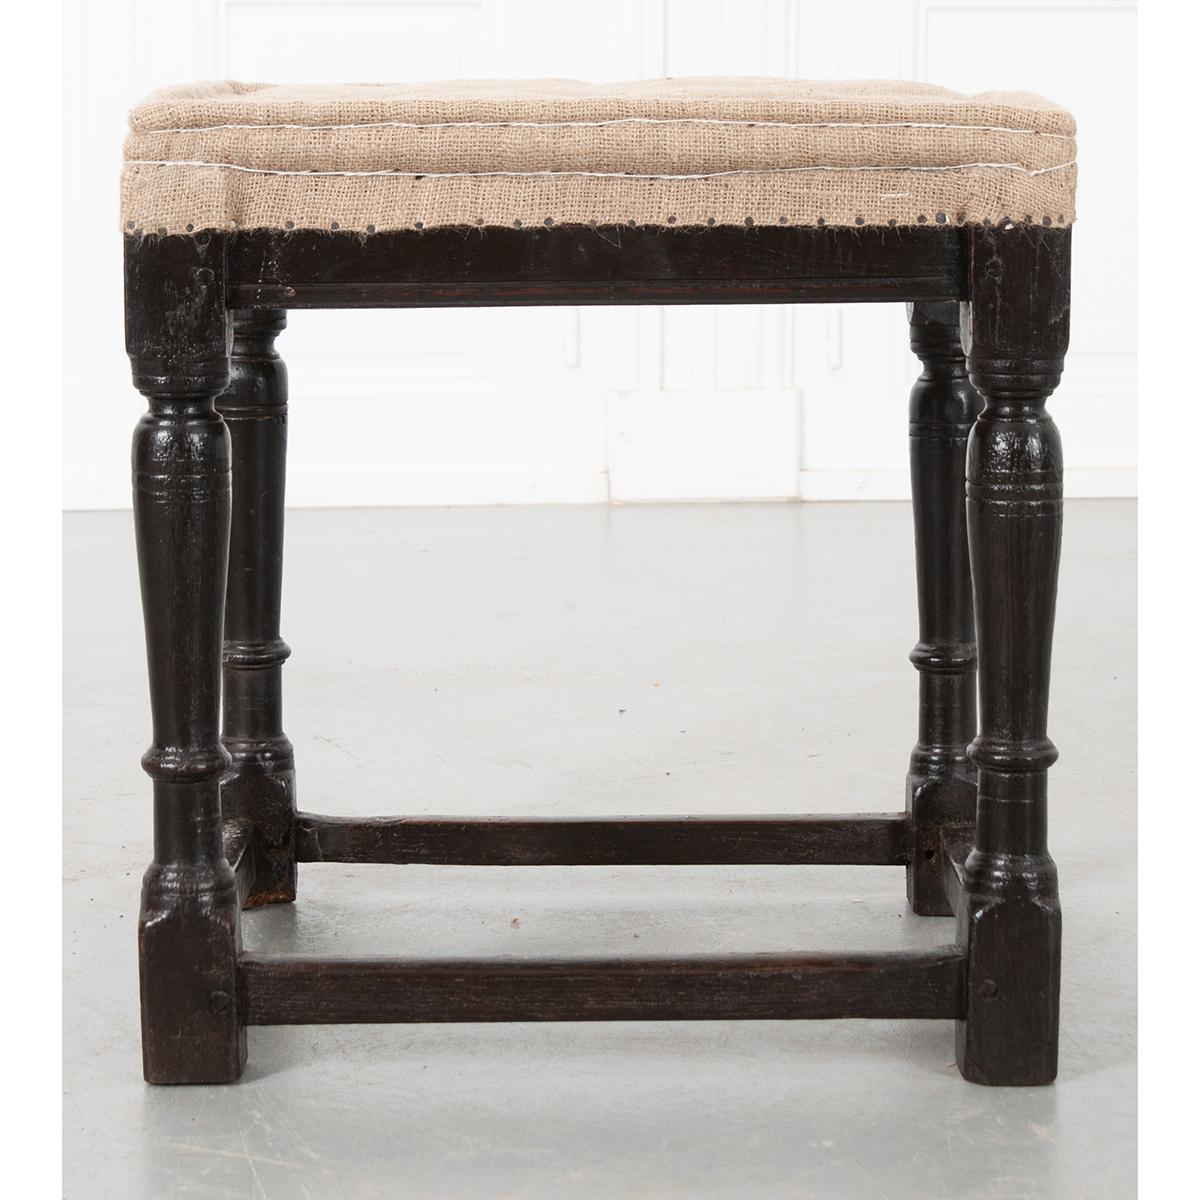 This is an English 18th century stool which has been painted black. It has burlap upholstery on the seat and can be used as it is or reupholstered. The four legs are turned and have stretchers around the bottom connecting all.
 